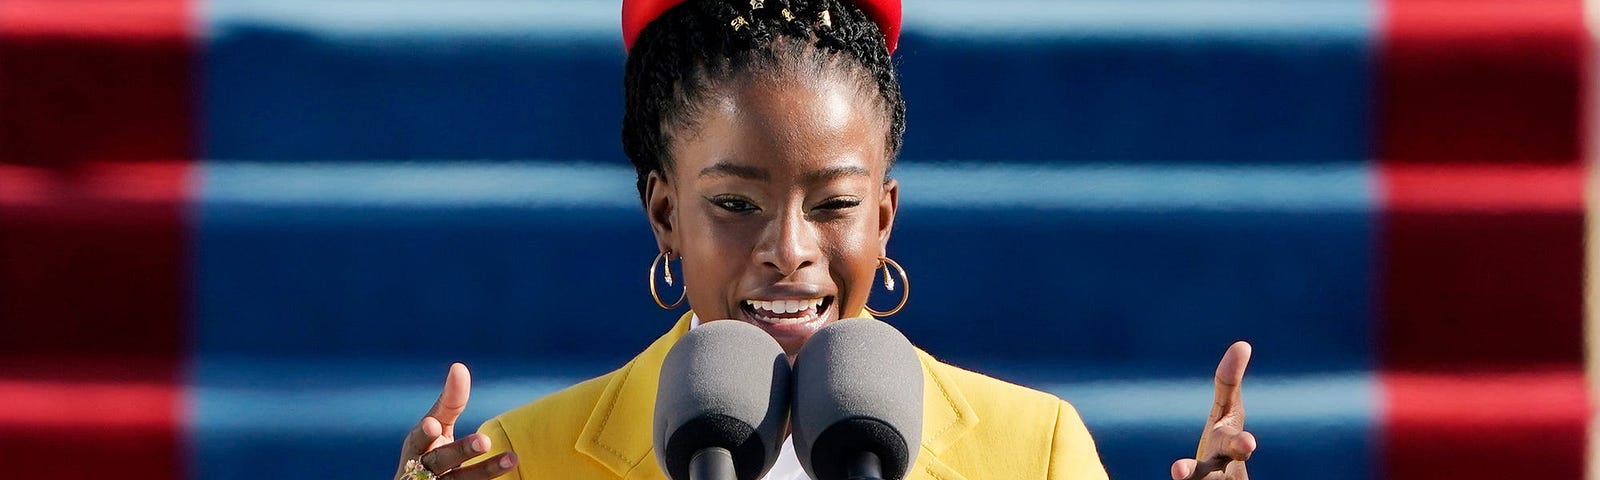 American poet Amanda Gorman reads a poem during the 59th Presidential Inauguration at the US Capitol.